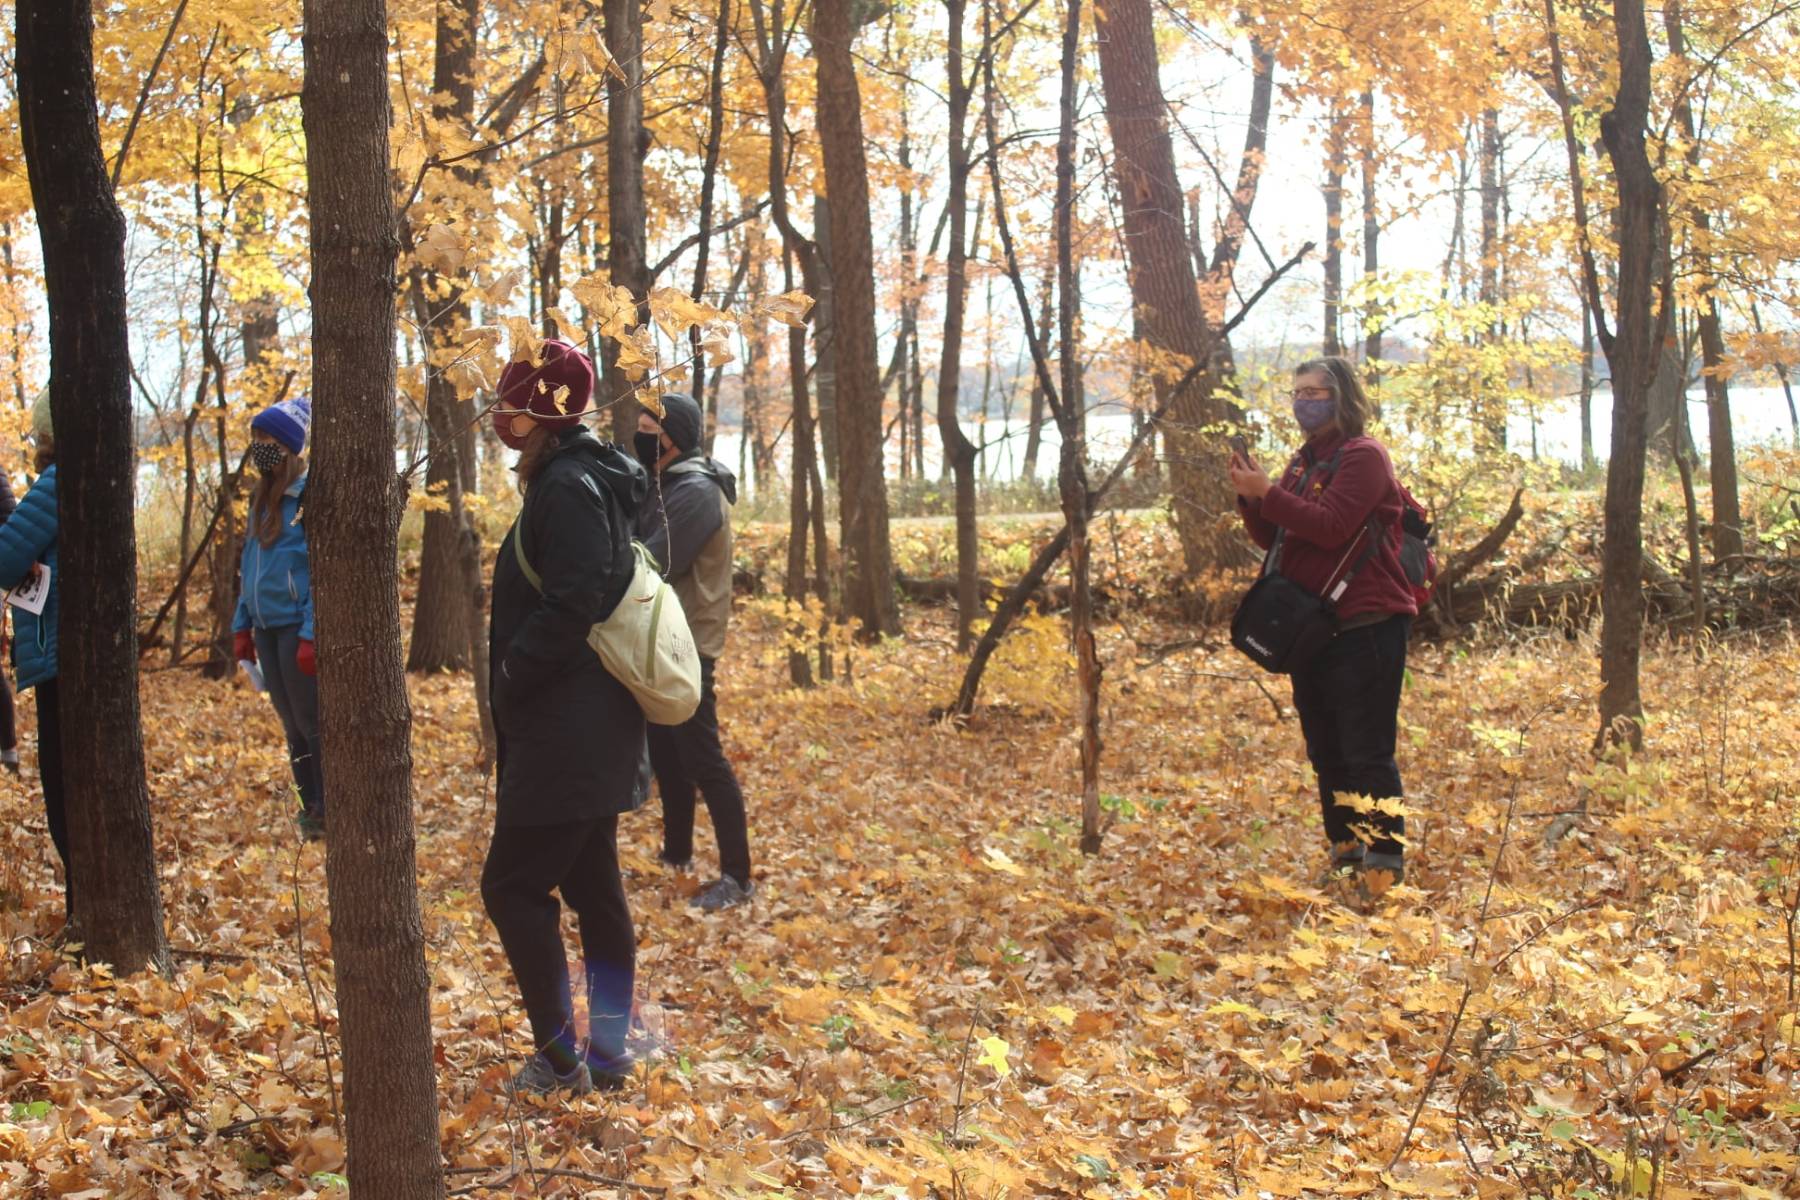 Adults in a fall woods with yellow leaves on trees and ground.